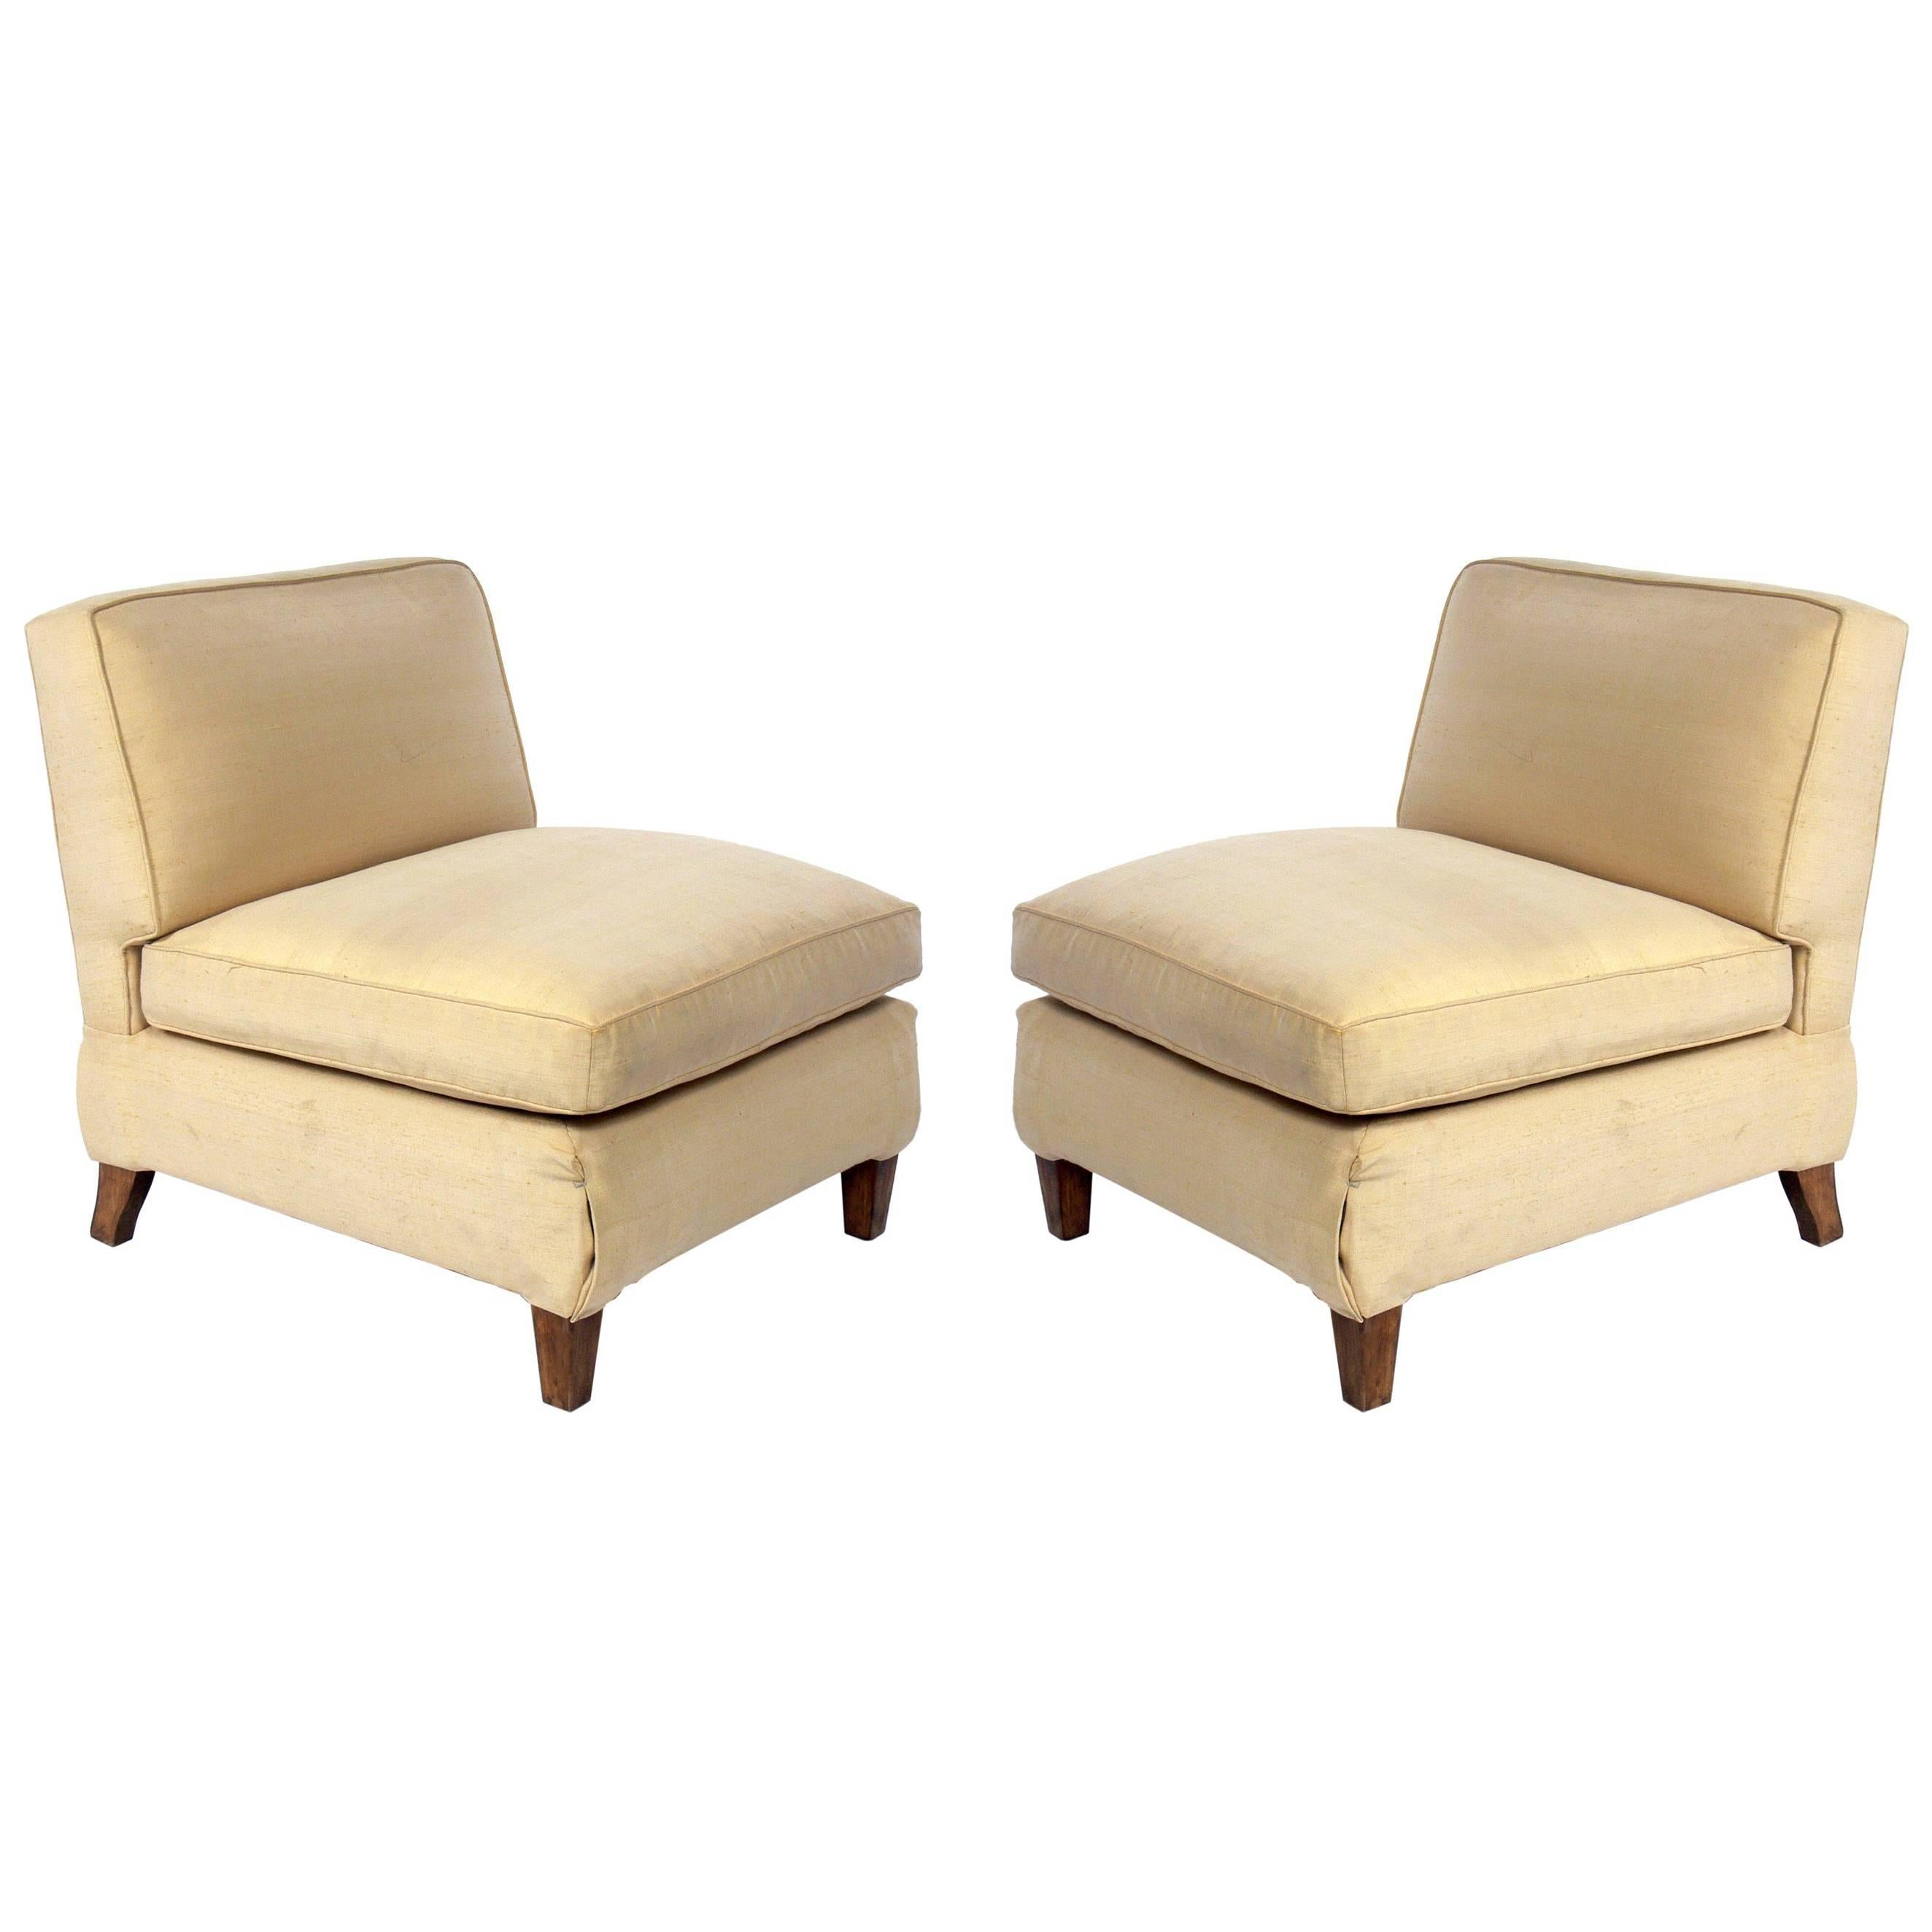 Pair of Clean Lined Slipper Chairs